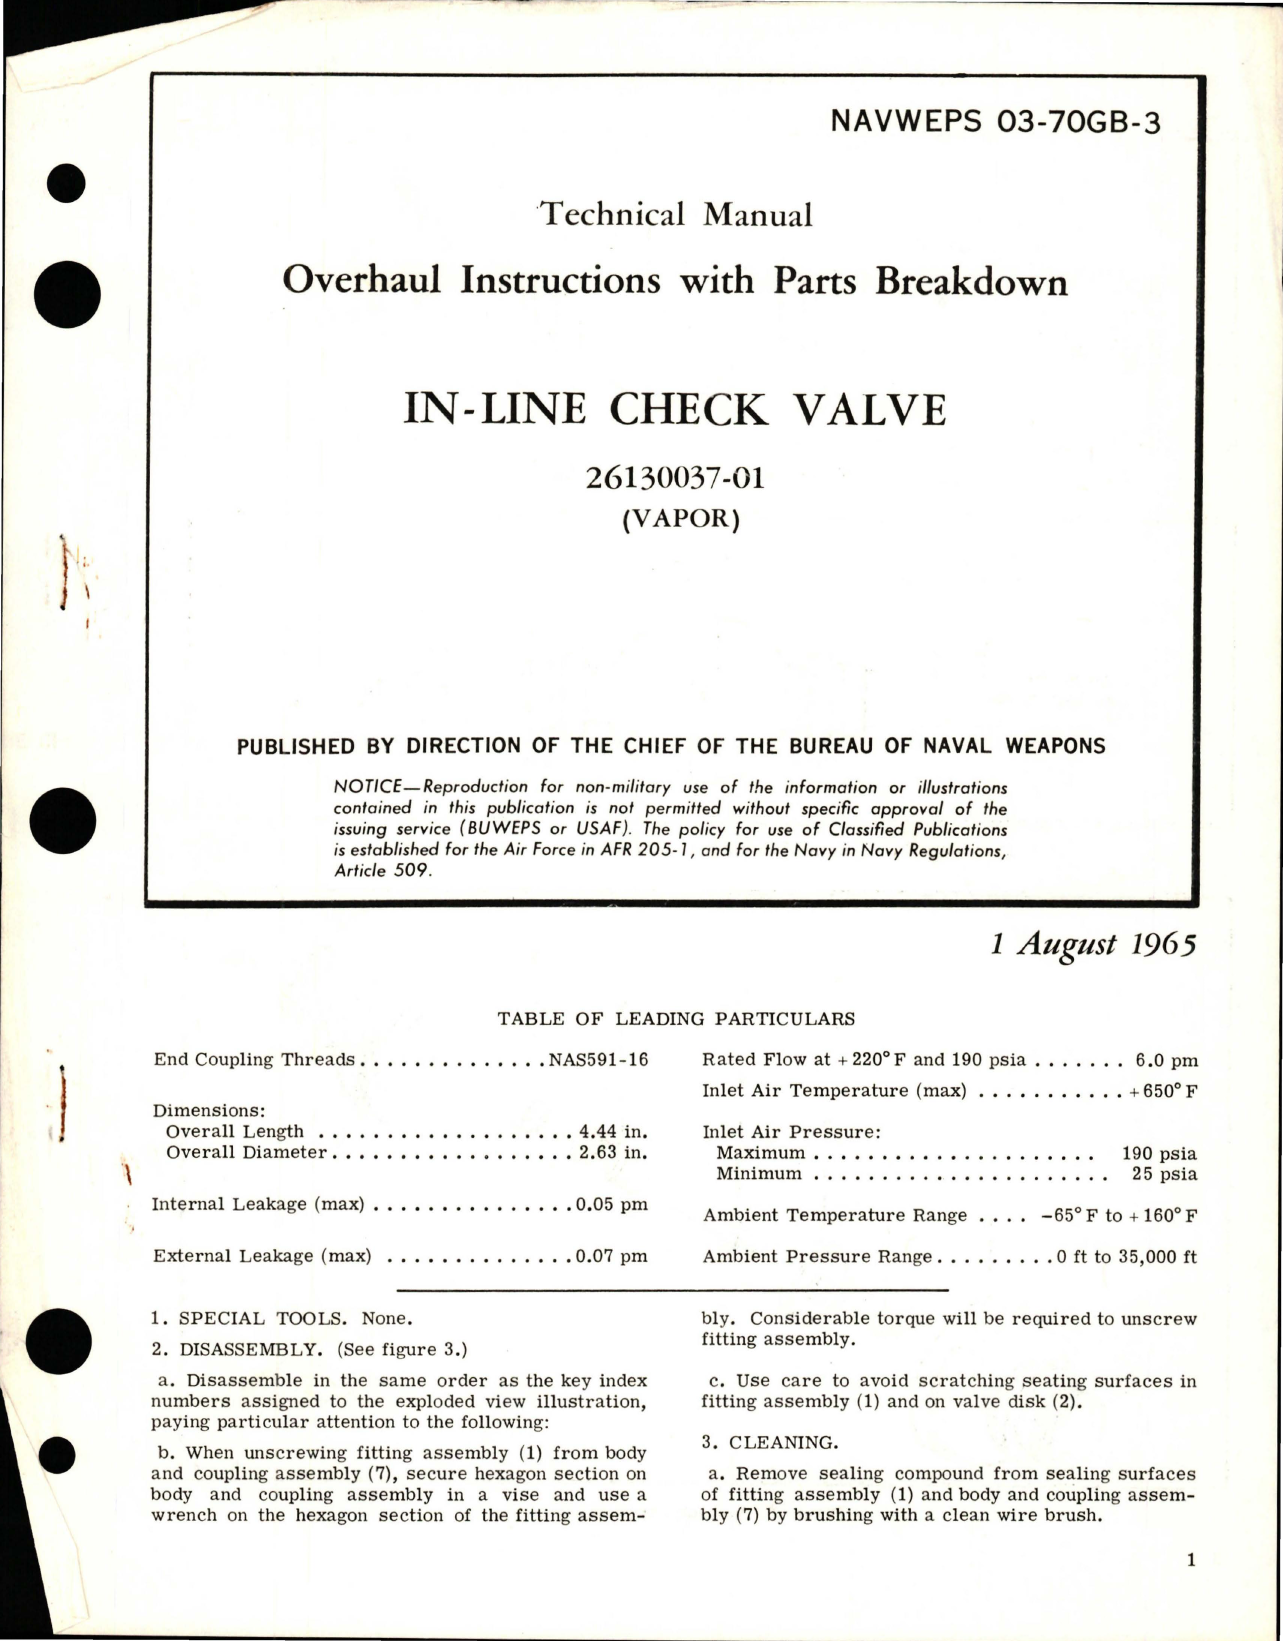 Sample page 1 from AirCorps Library document: Overhaul Instructions with Parts Breakdown for In-Line Check Valve - 26130037-01